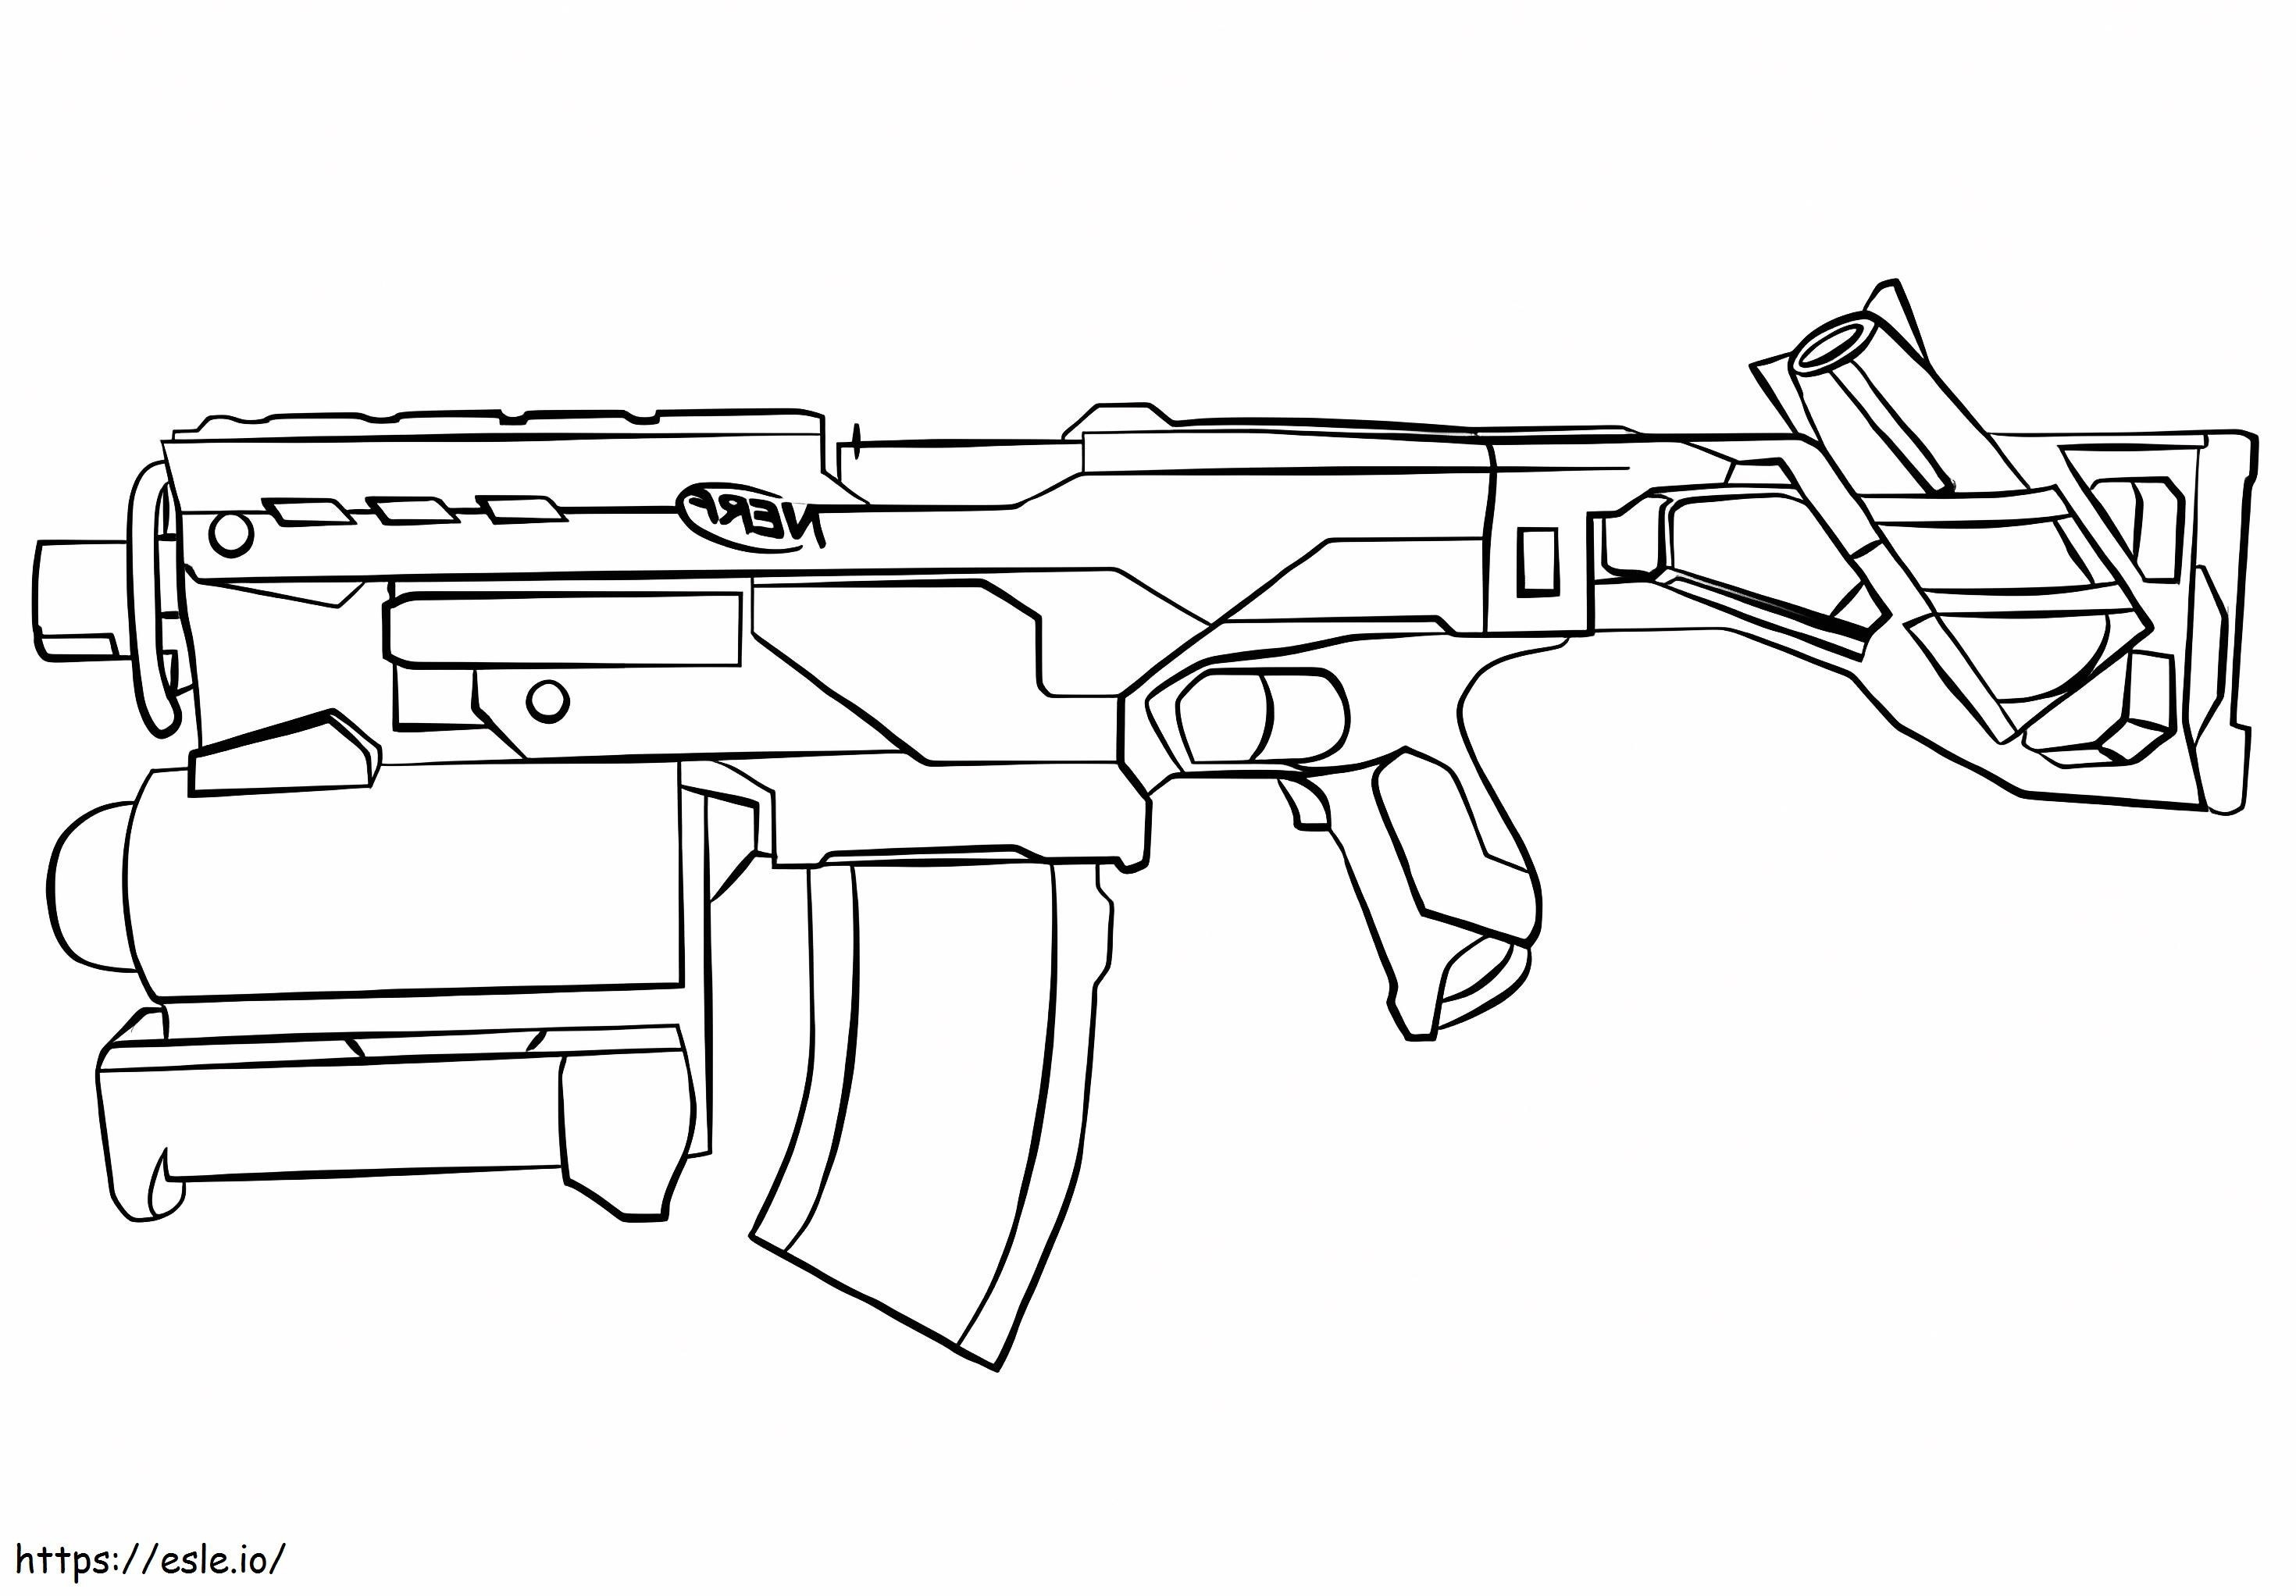 Awesome Weapon coloring page